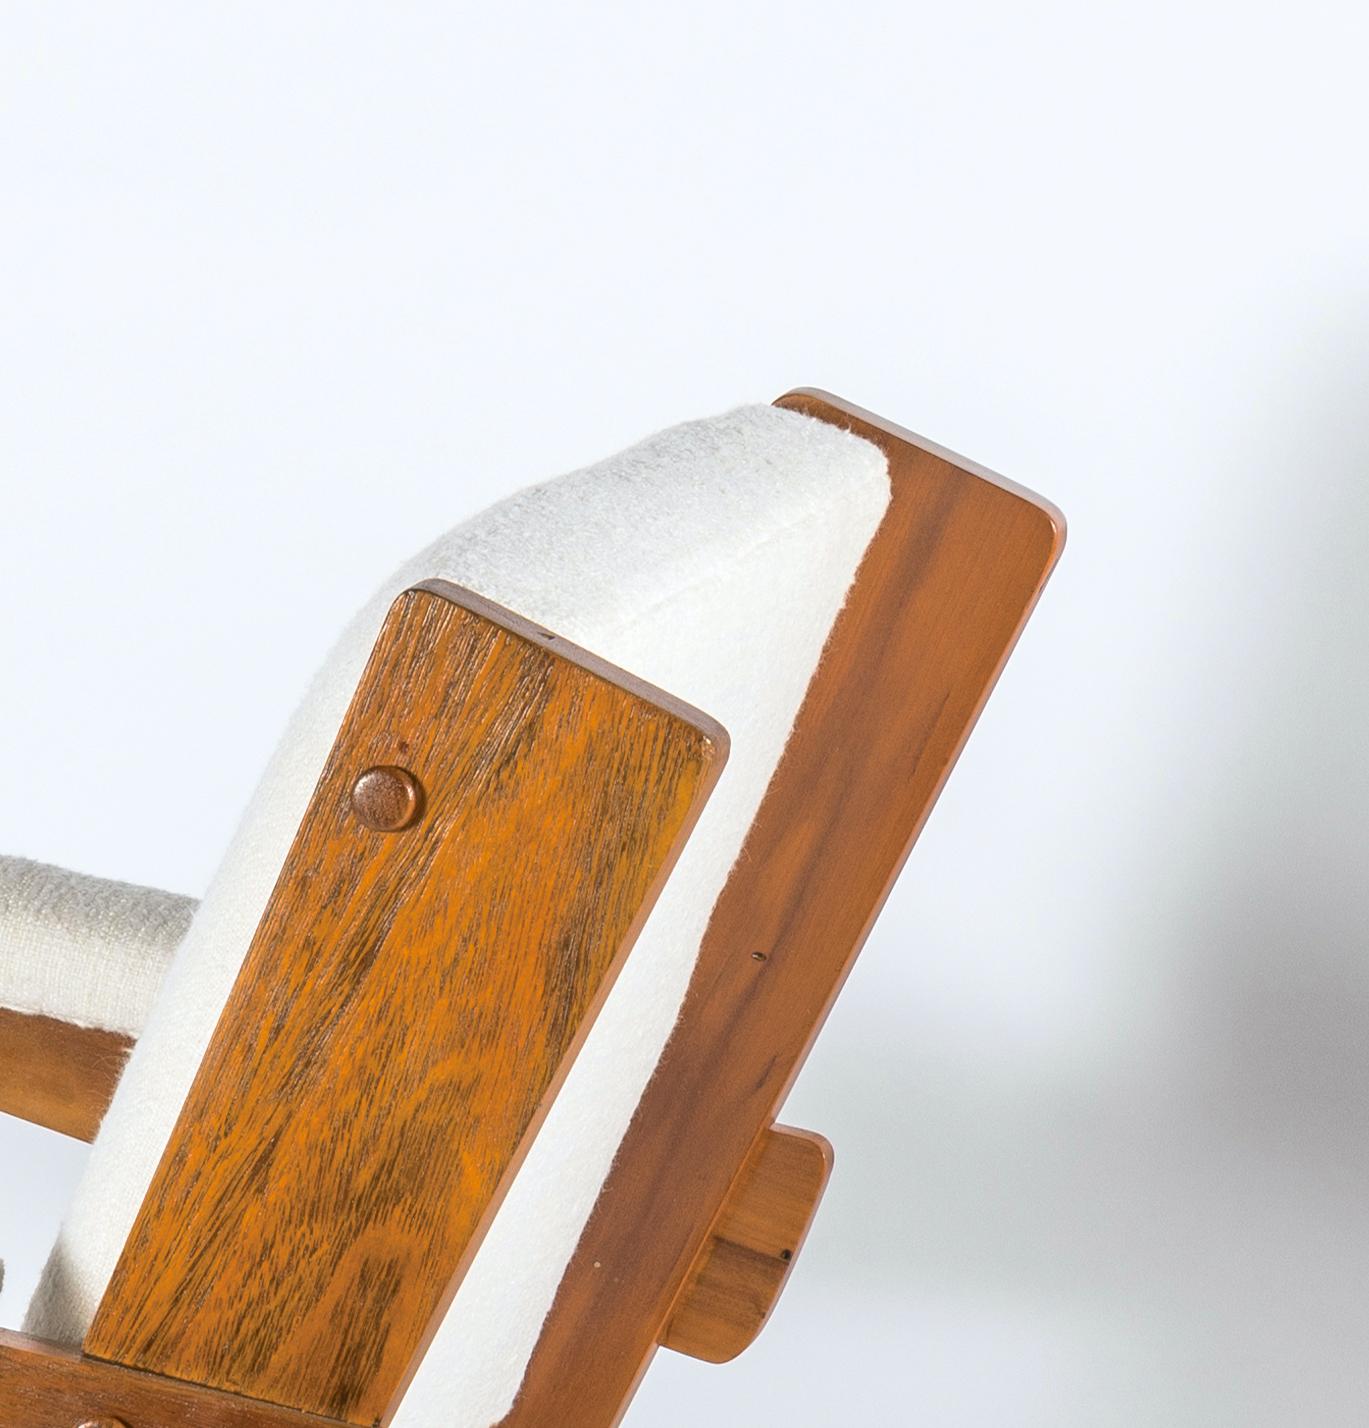 The pair of armchairs by Lina Bo Bardi (attributed.) is the Modern Brazilian mid century interpretation of European Modern design but with the twist of tropical wood, Peroba wood. Still in process of attribution, the armchair got all the character